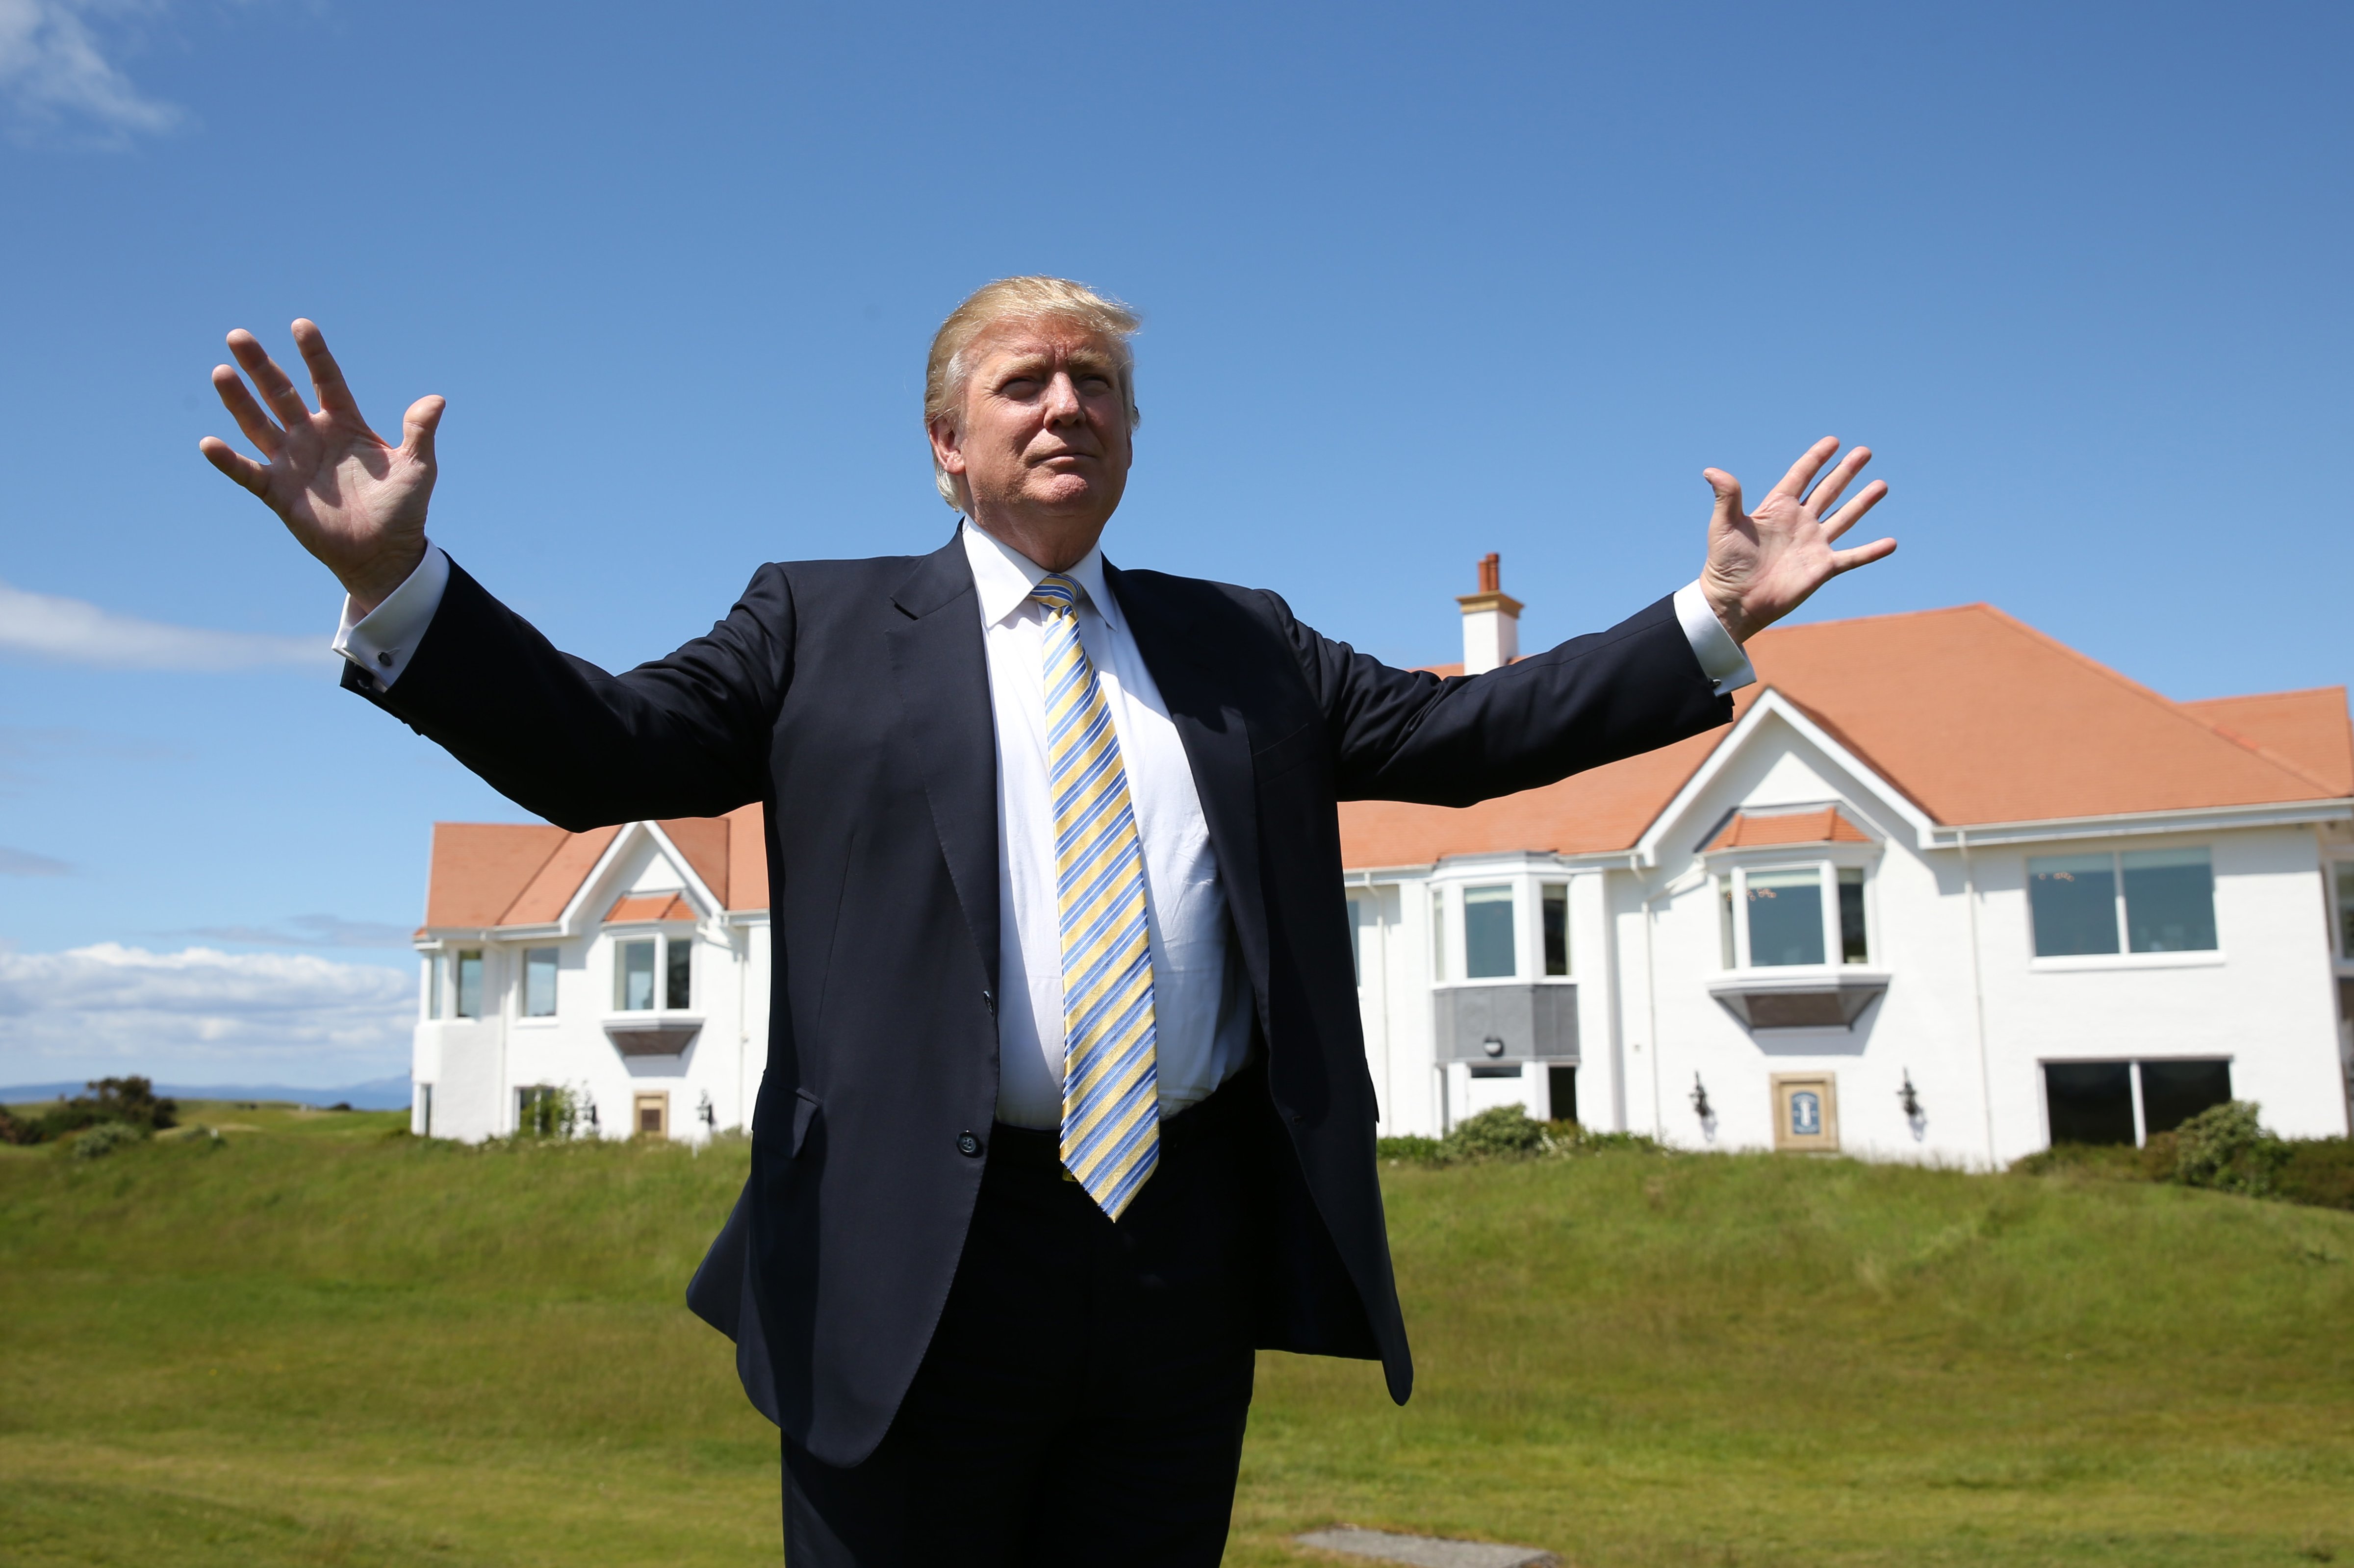 Donald Trump visits Turnberry Golf Club, after its $10 Million refurbishment, on June 8, 2015 in Turnberry, Scotland. (Ian MacNicol—Getty Images)